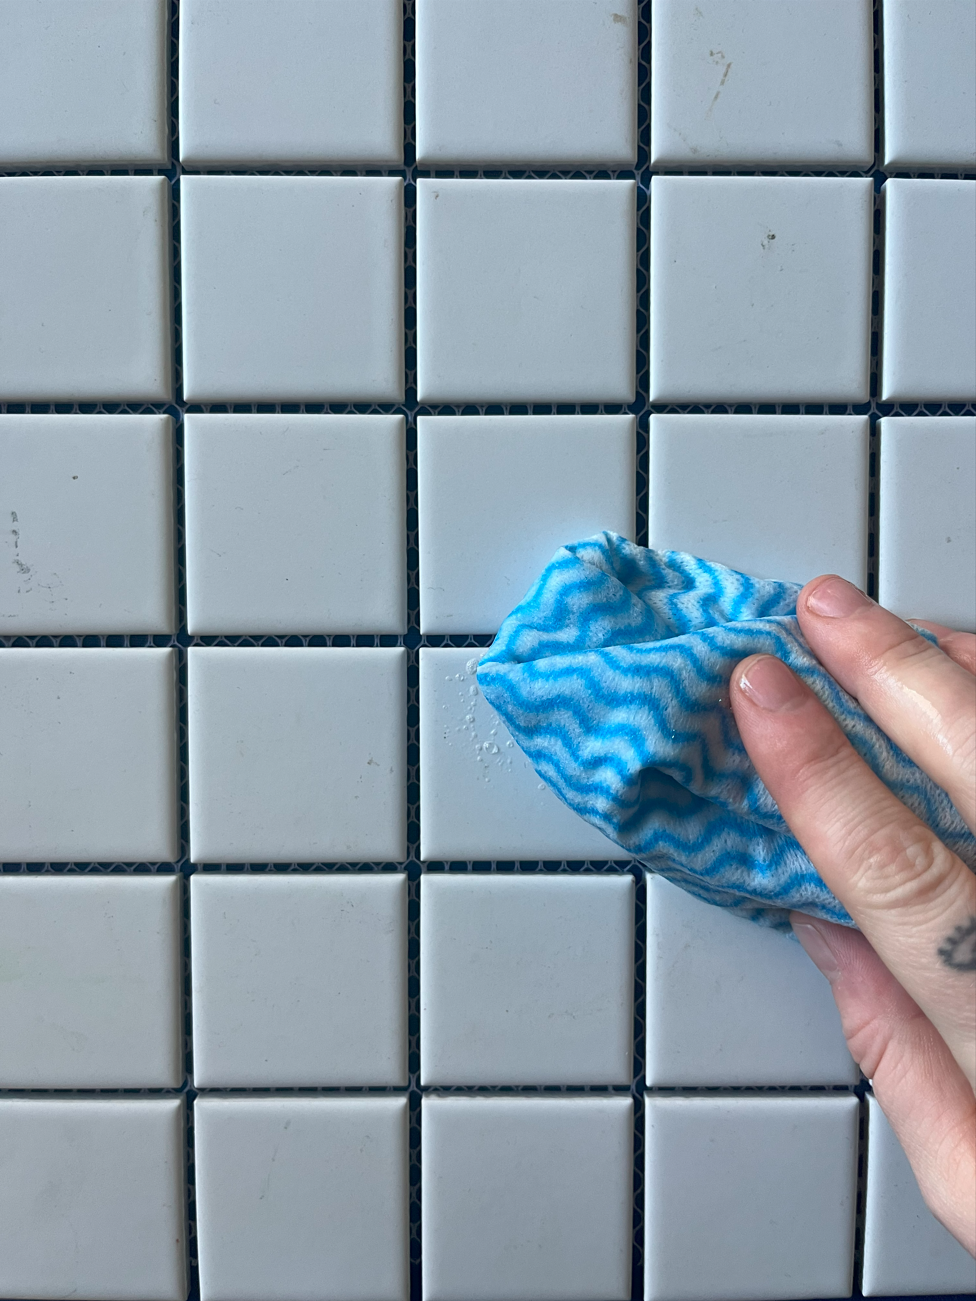 Tile painting cleaning with a jay cloth